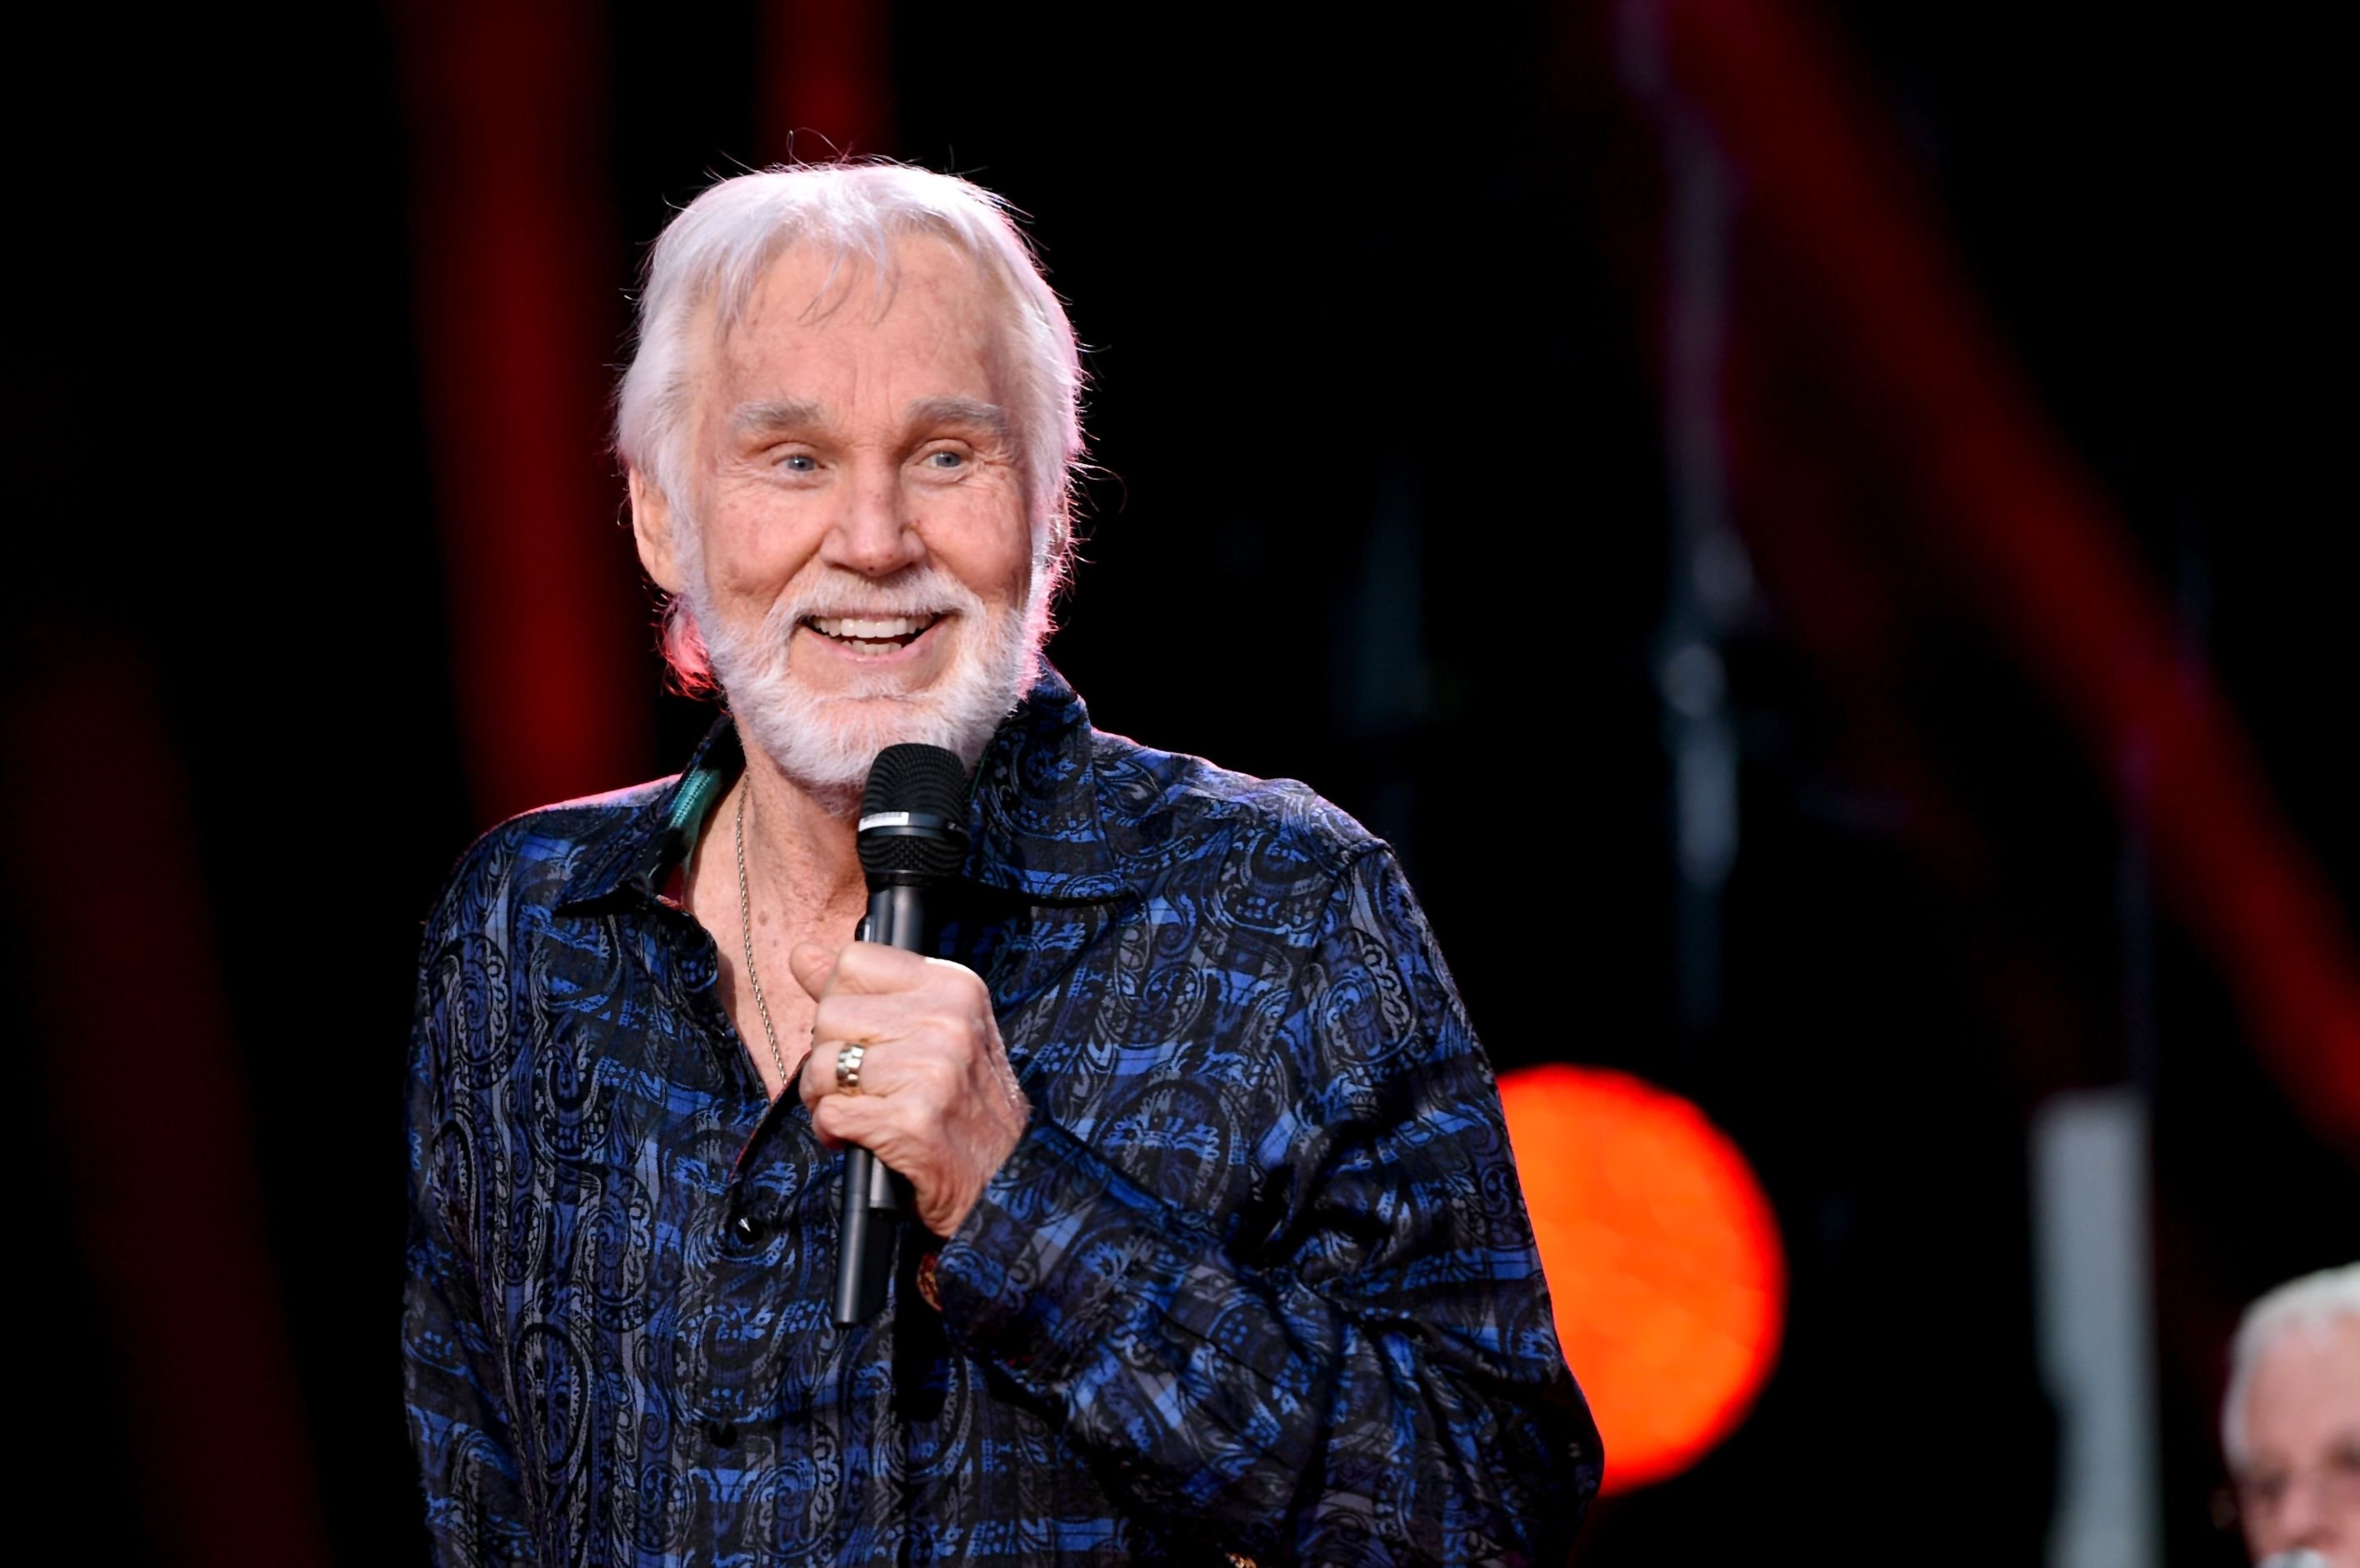 Kenny Rogers on June 8, 2017 in Nashville, Tennessee. | Photo: Getty Images